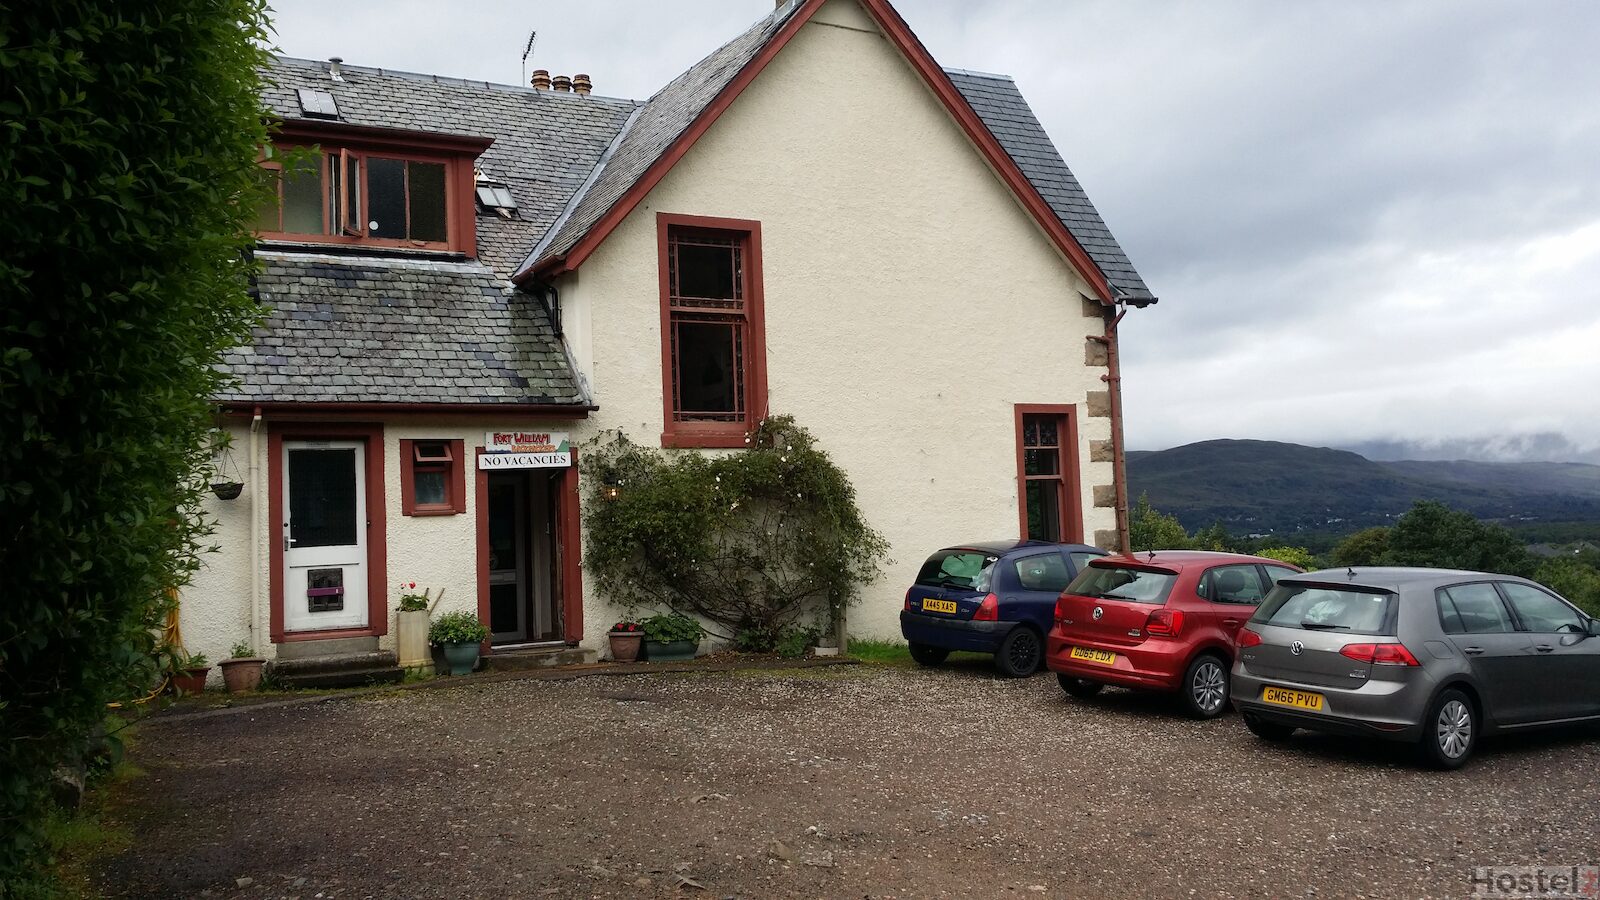 Fort William Backpackers, Fort William